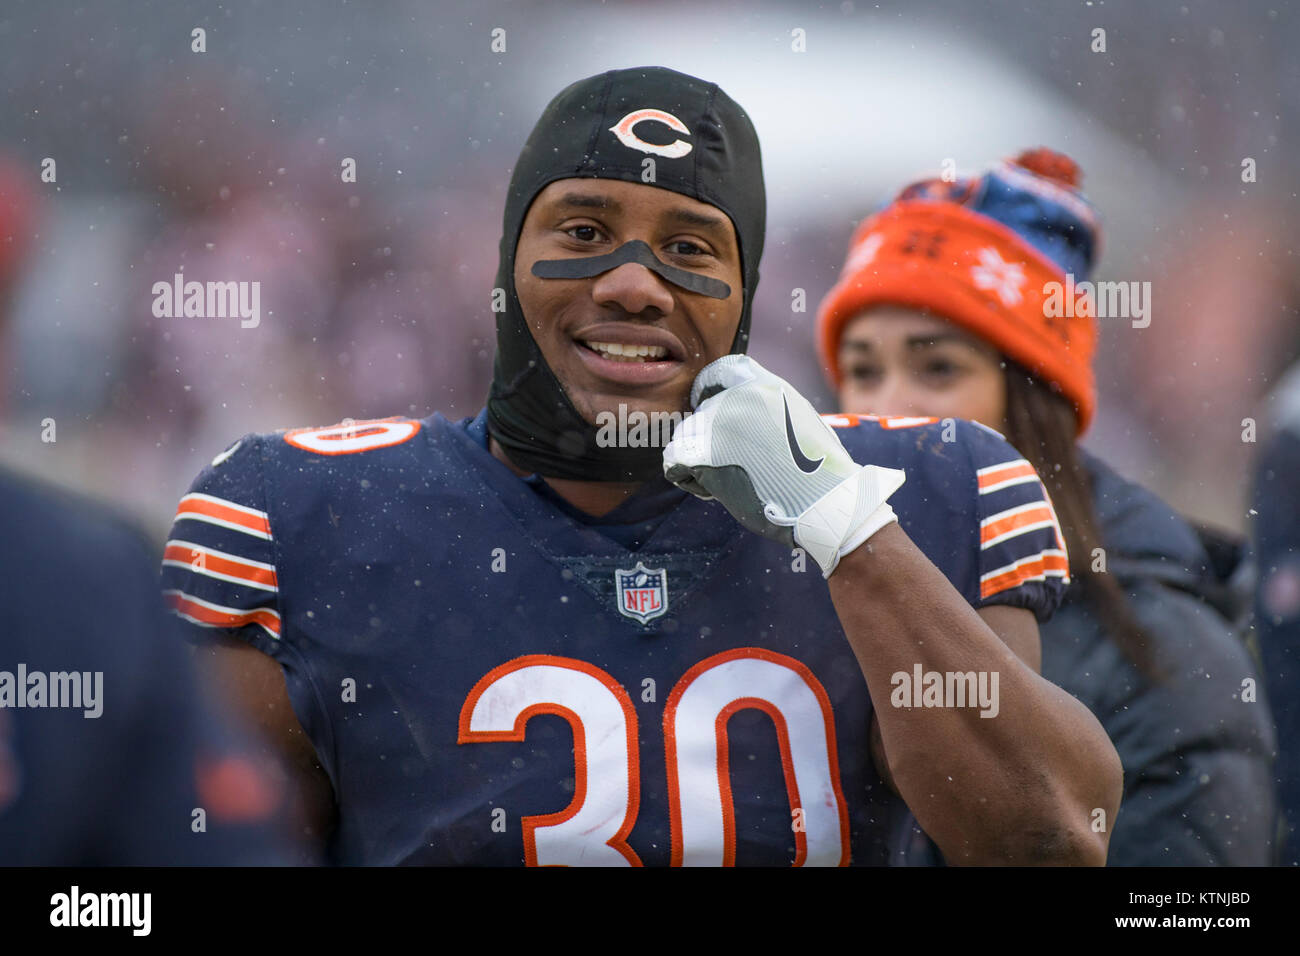 Chicago, Illinois, USA. 24th Dec, 2017. - Bears #30 Benny Cunningham walks  off of the field after the NFL Game between the Cleveland Browns and  Chicago Bears at Soldier Field in Chicago,